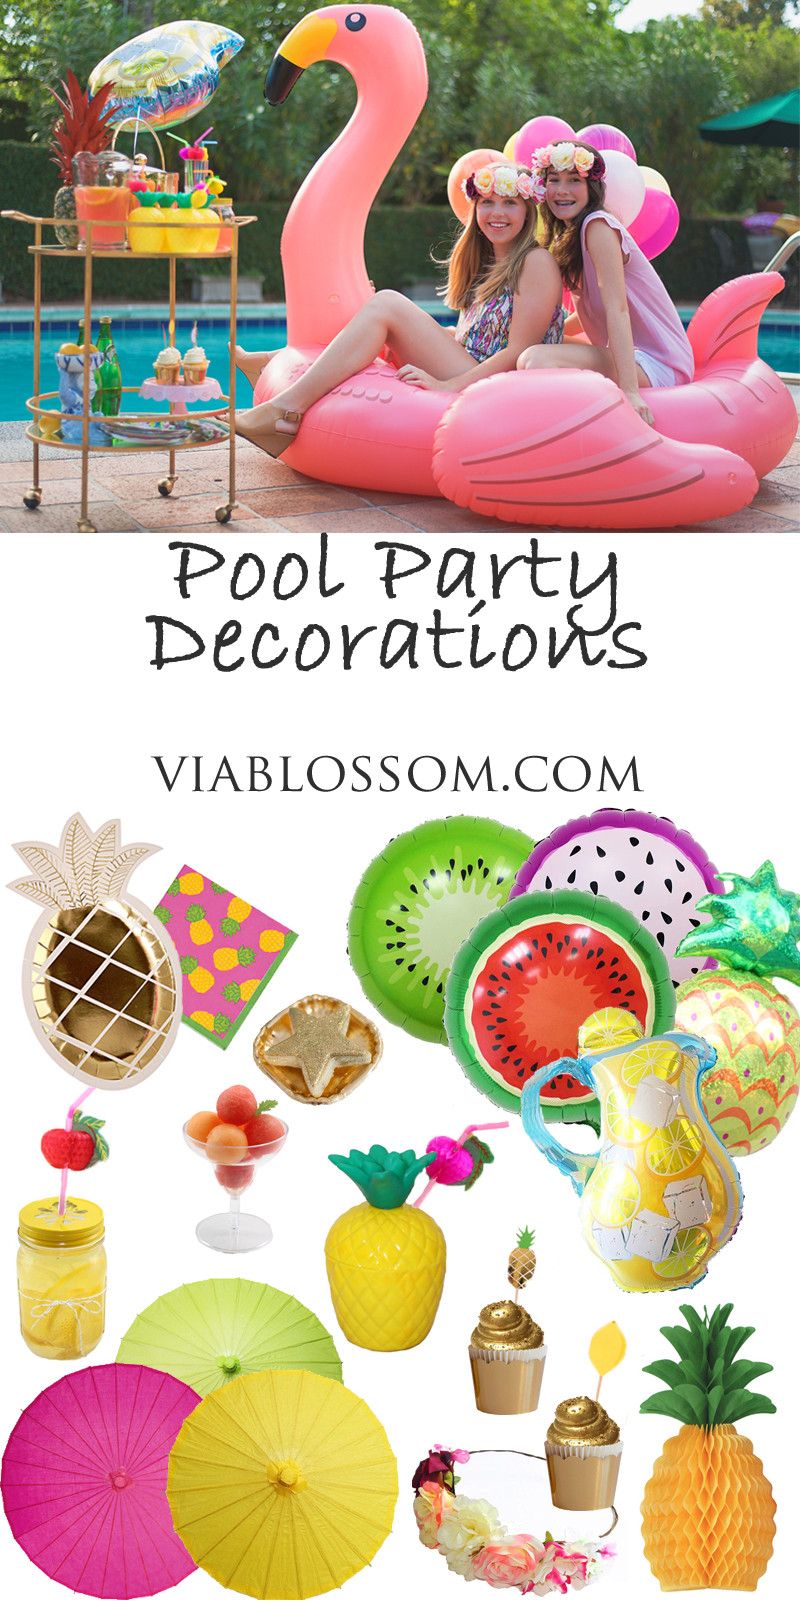 Poolside Party Decoration Ideas
 Pool Party Ideas Via Blossom